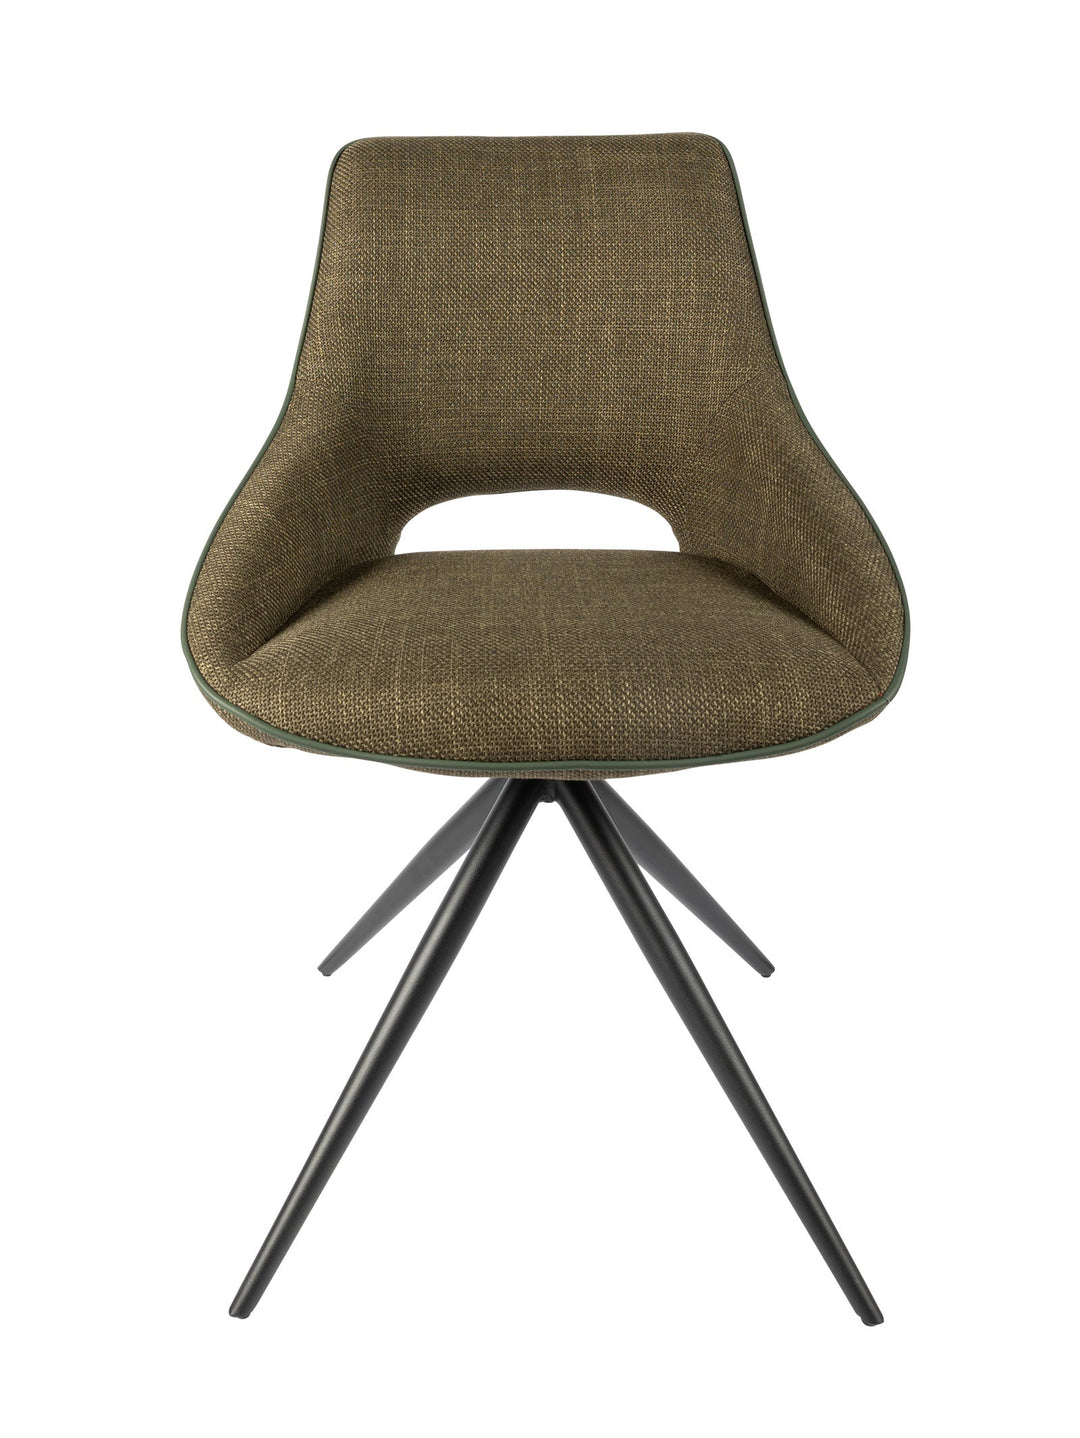 Louis Swivel Dining Chair - Kitchen & Dining Room Chairs- Hertex Haus Online - Furniture